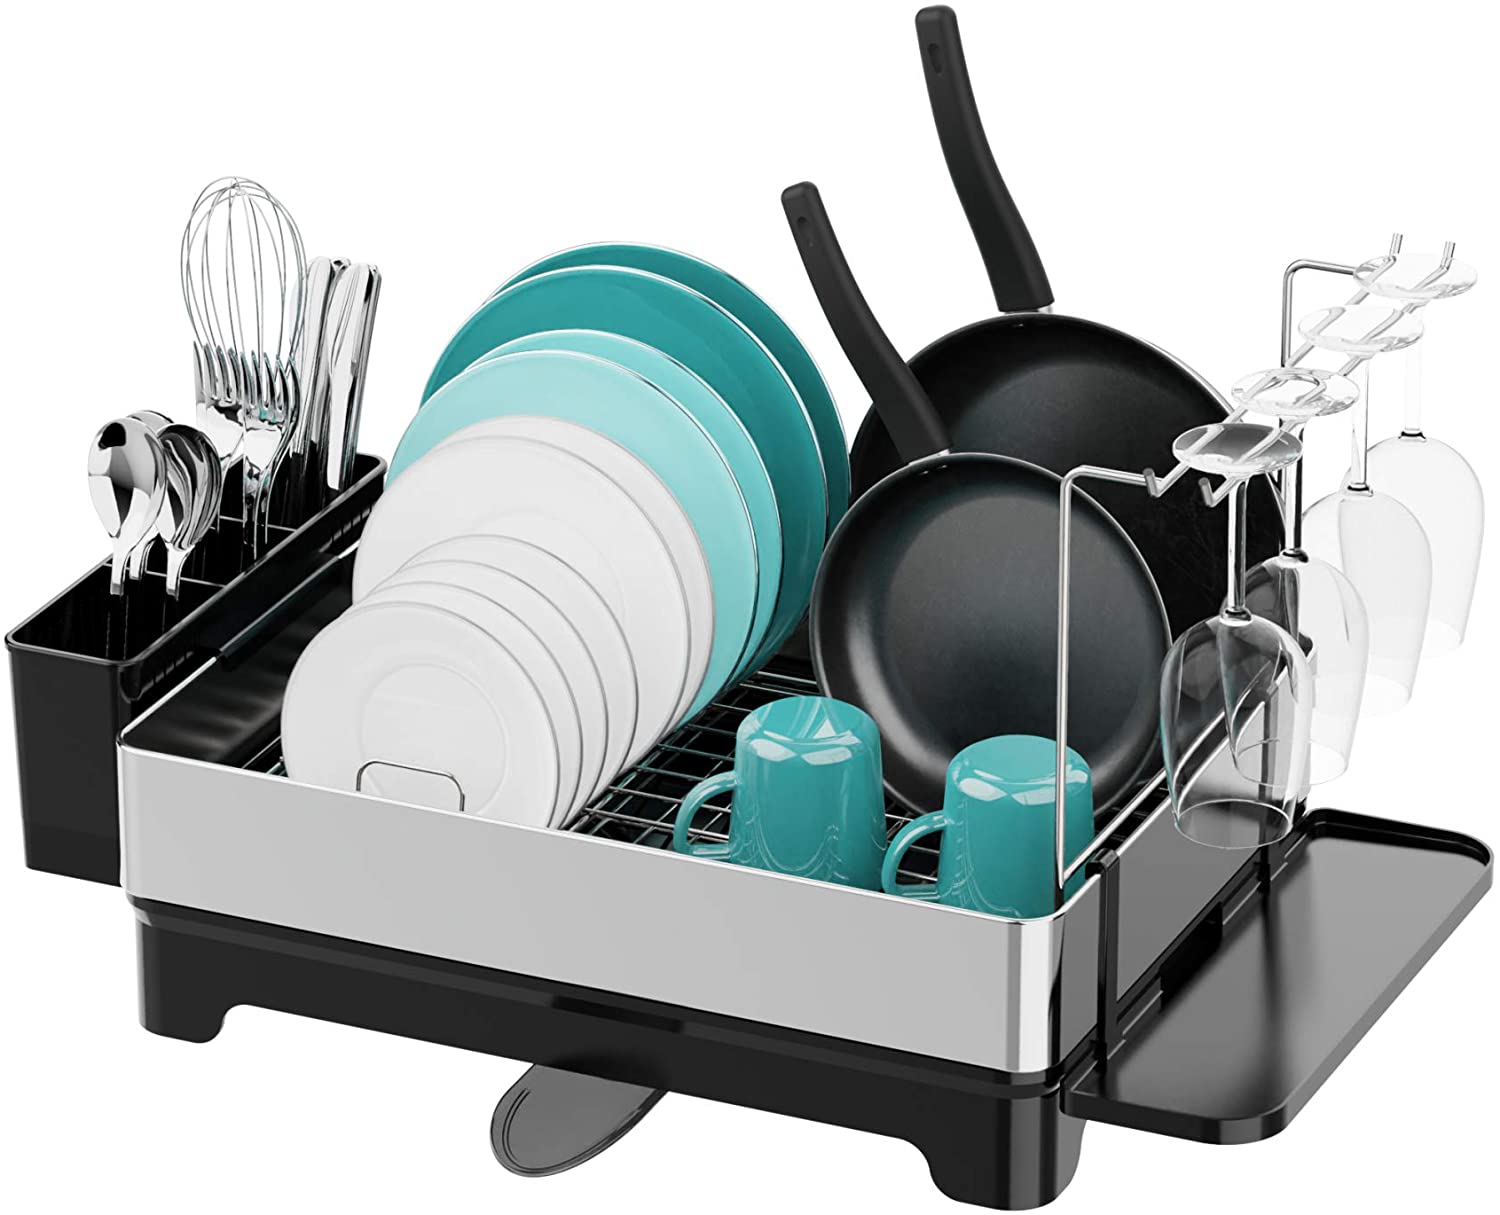 Veckle Stainless Steel Dish Drying Rack $19.99